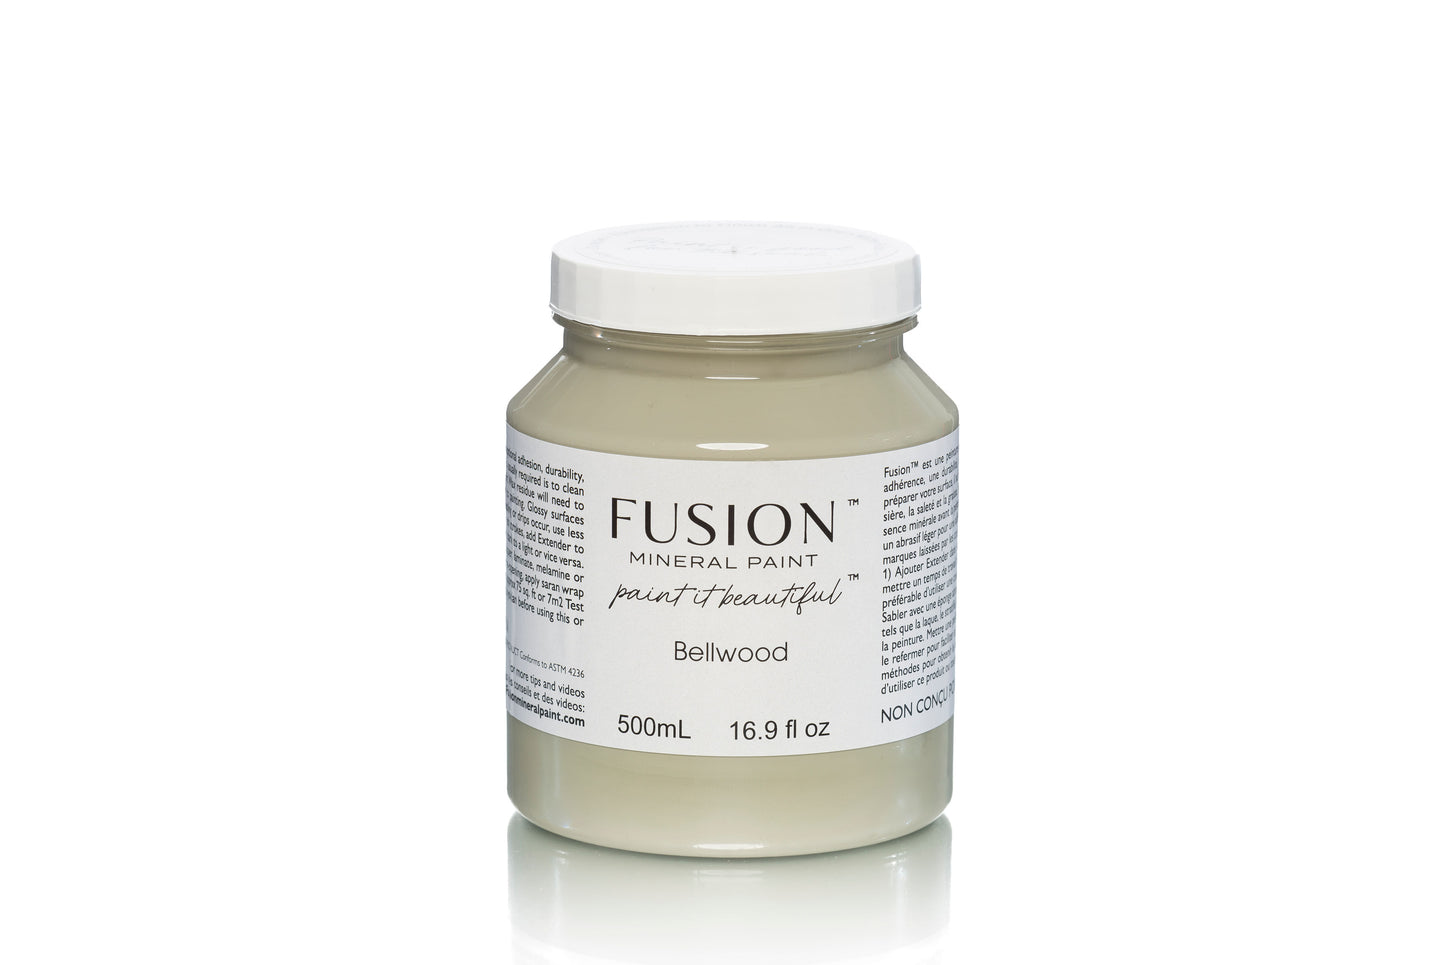 FUSION MINERAL PAINT- Bellwood